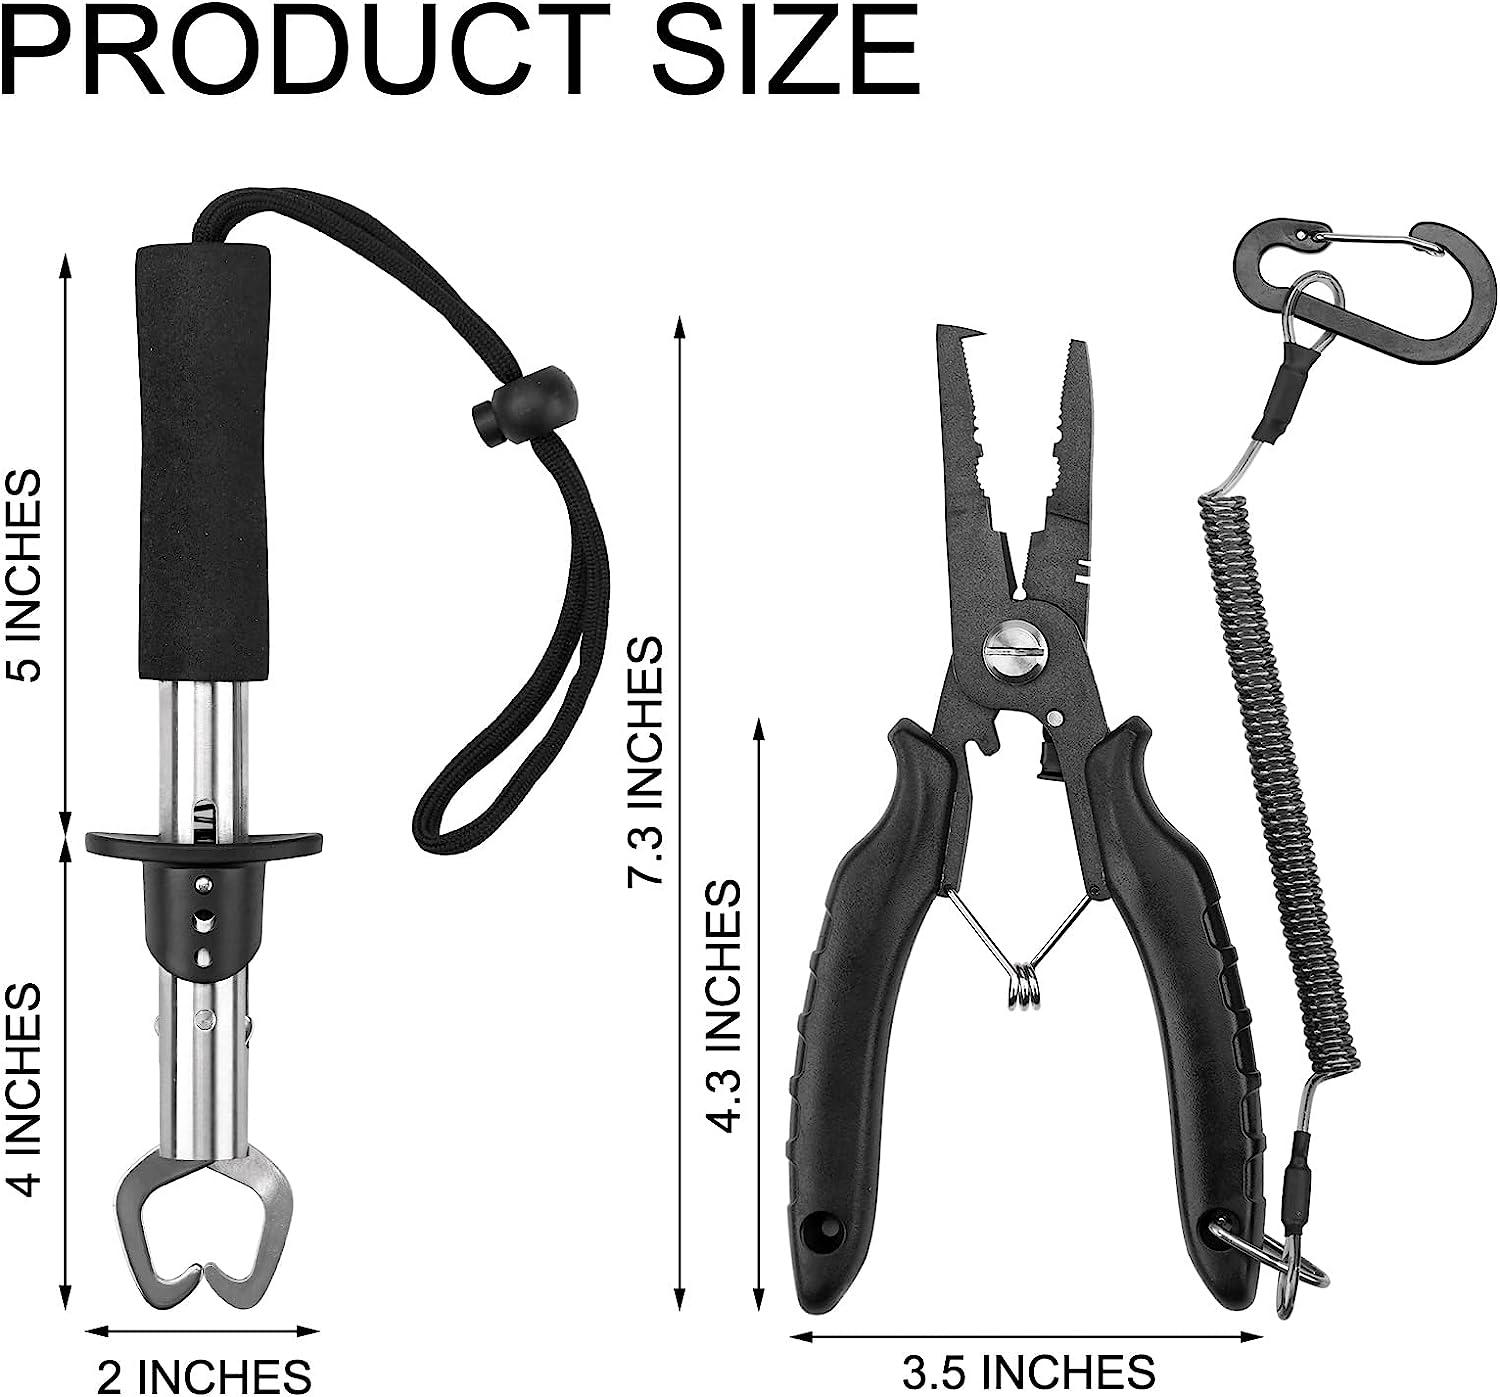 Fishing Pliers, Fish Lip Gripper, Stainless Steel Fishing Tools Set,  Multifunctional Fishing Accessories, Portable Fish Gripper With Wrist  Strap, Fishing Pliers Saltwater, Fishing Gifts for Men